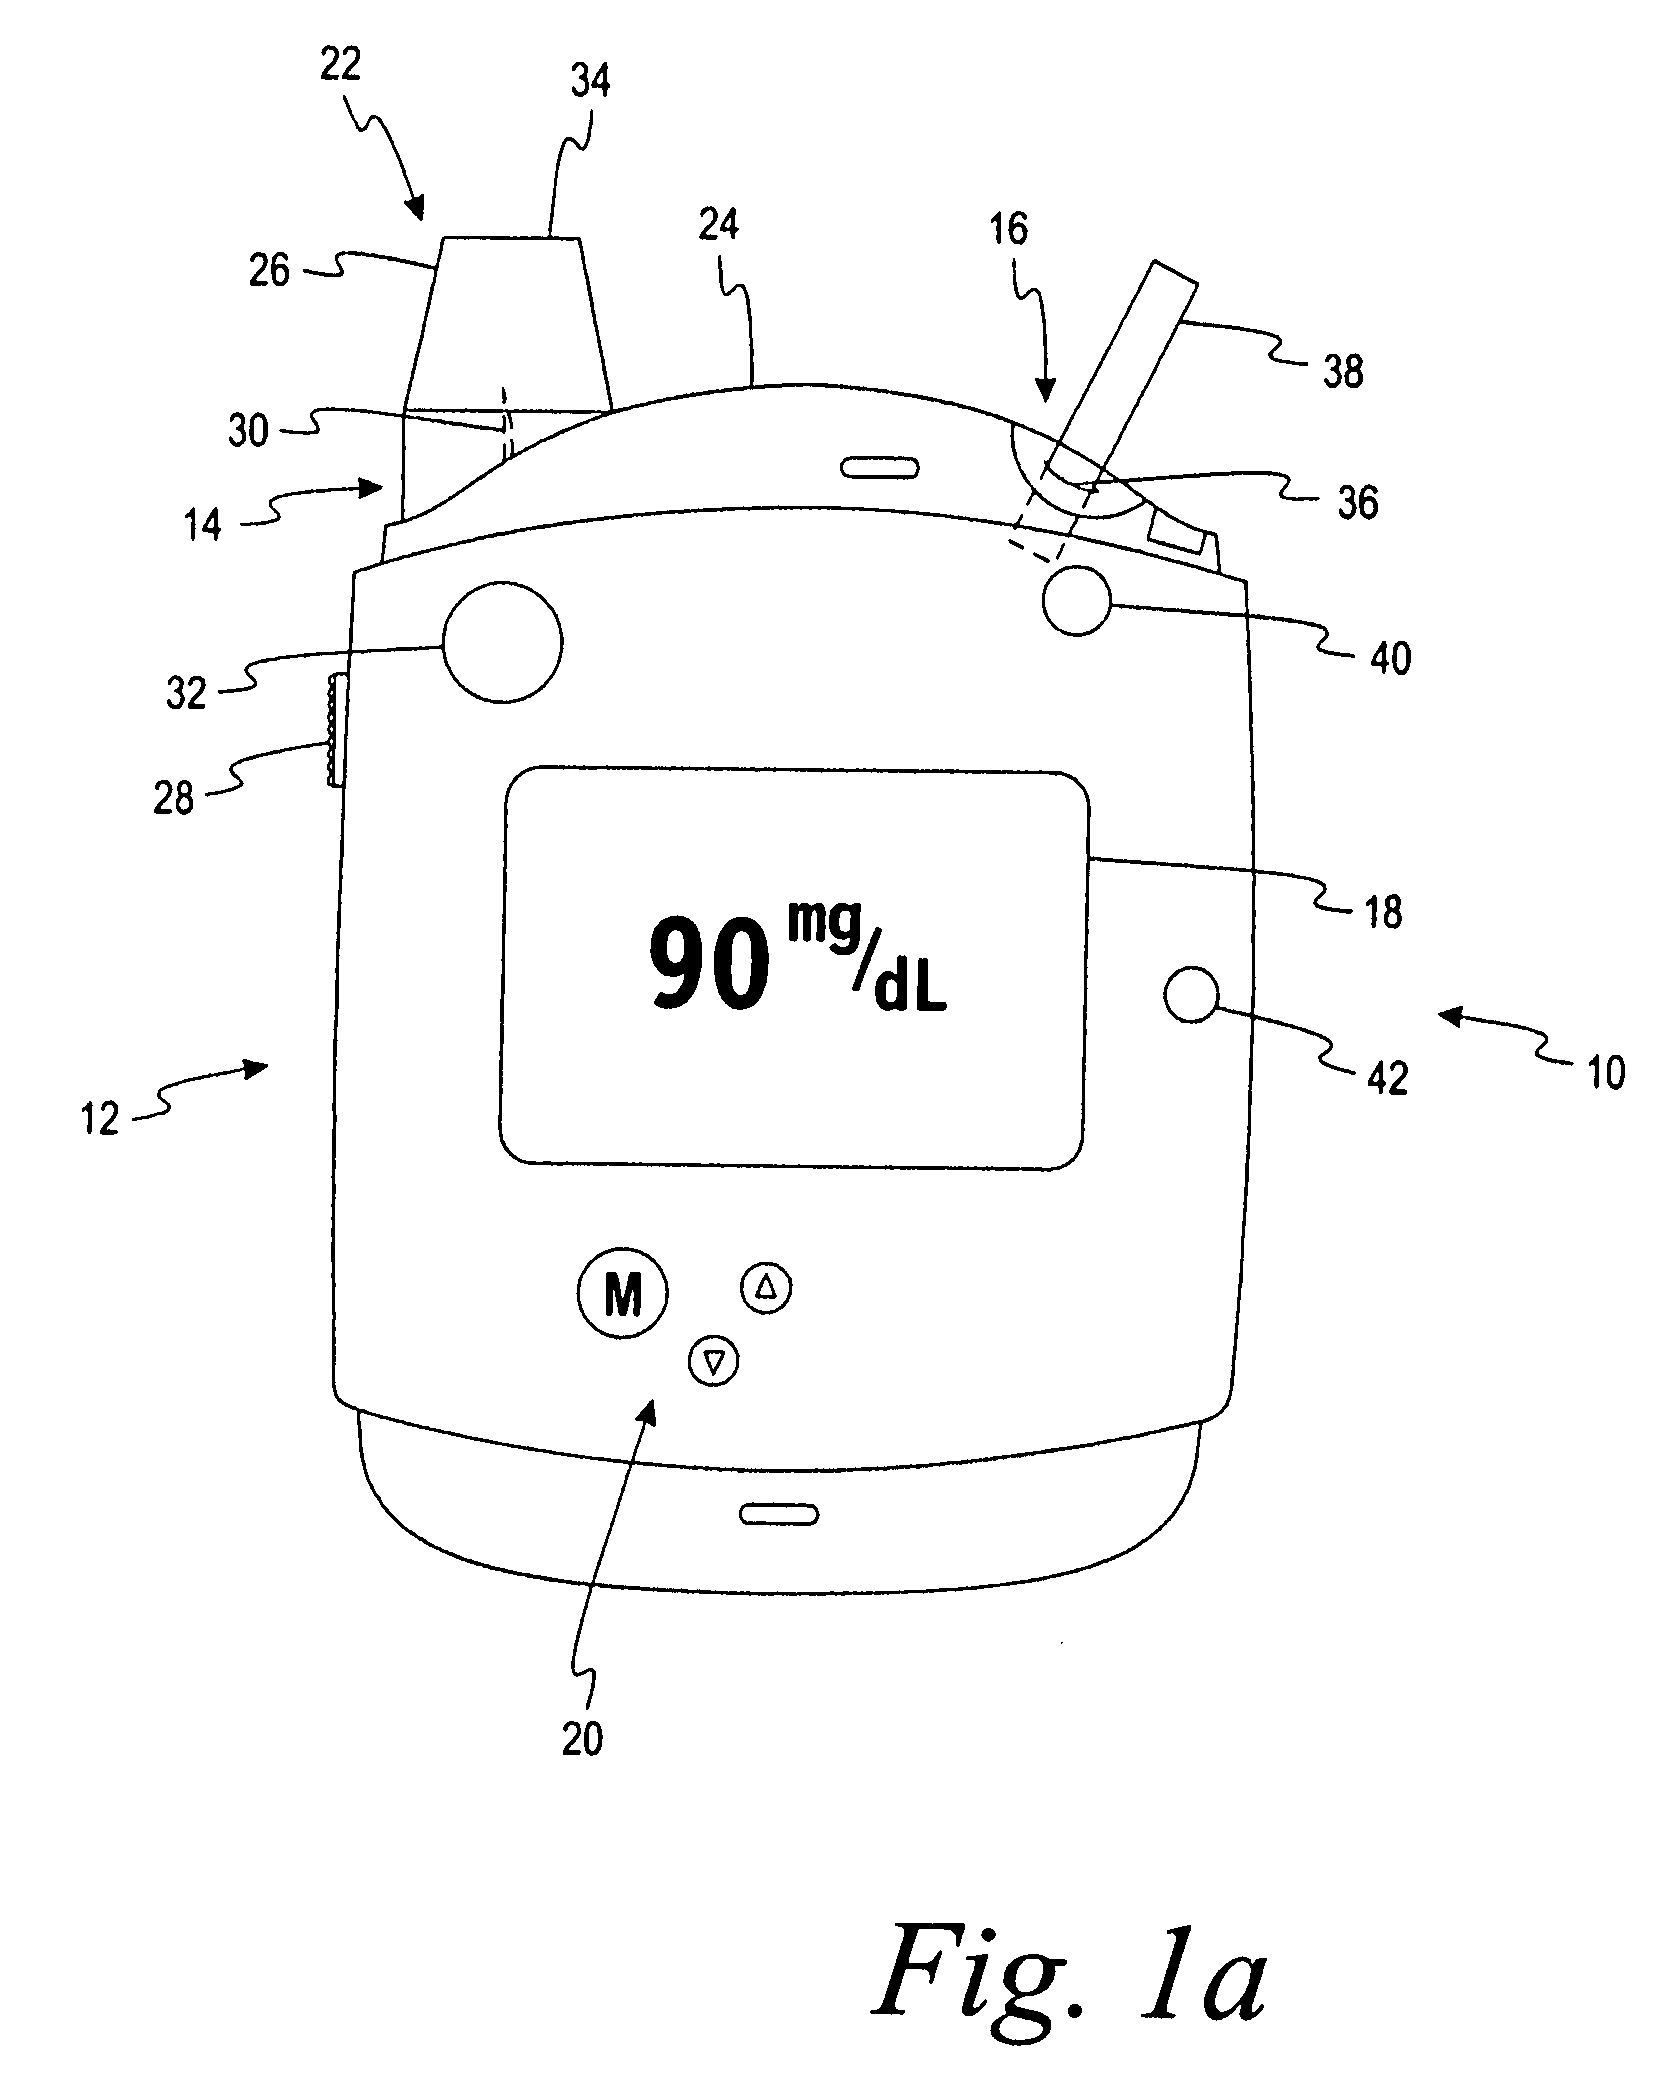 System and method for transferring calibration data